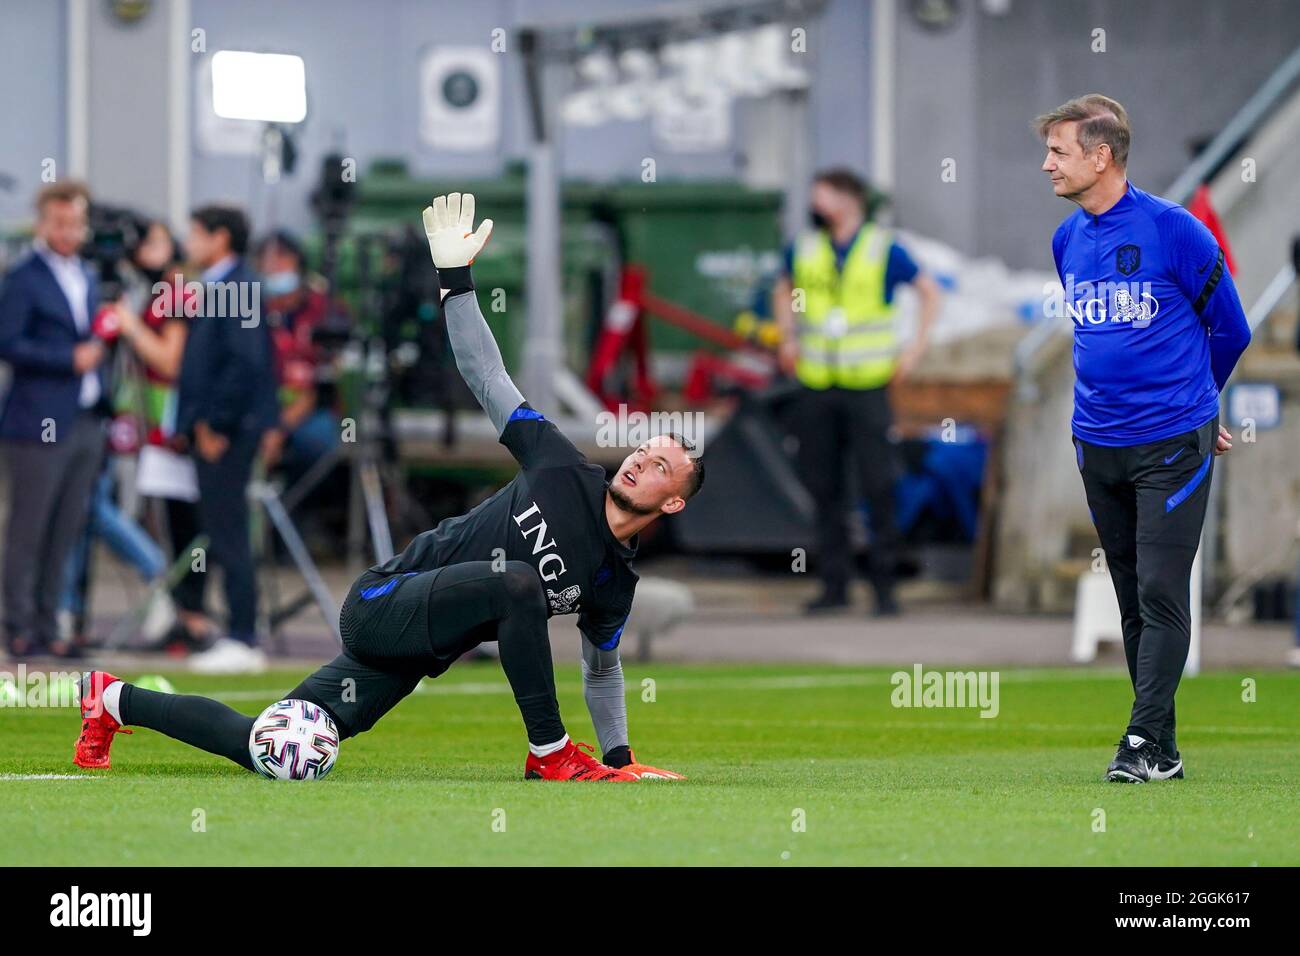 OSLO, NORWAY - SEPTEMBER 1: Goalkeeper Justin Bijlow of the Netherlands, goalkeeper trainer Frans Hoek of the Netherlands during the World Cup Qualifier match between Norway and Netherlands at Ullevaal Stadium on September 1, 2021 in Oslo, Norway (Photo by Andre Weening/Orange Pictures) Stock Photo